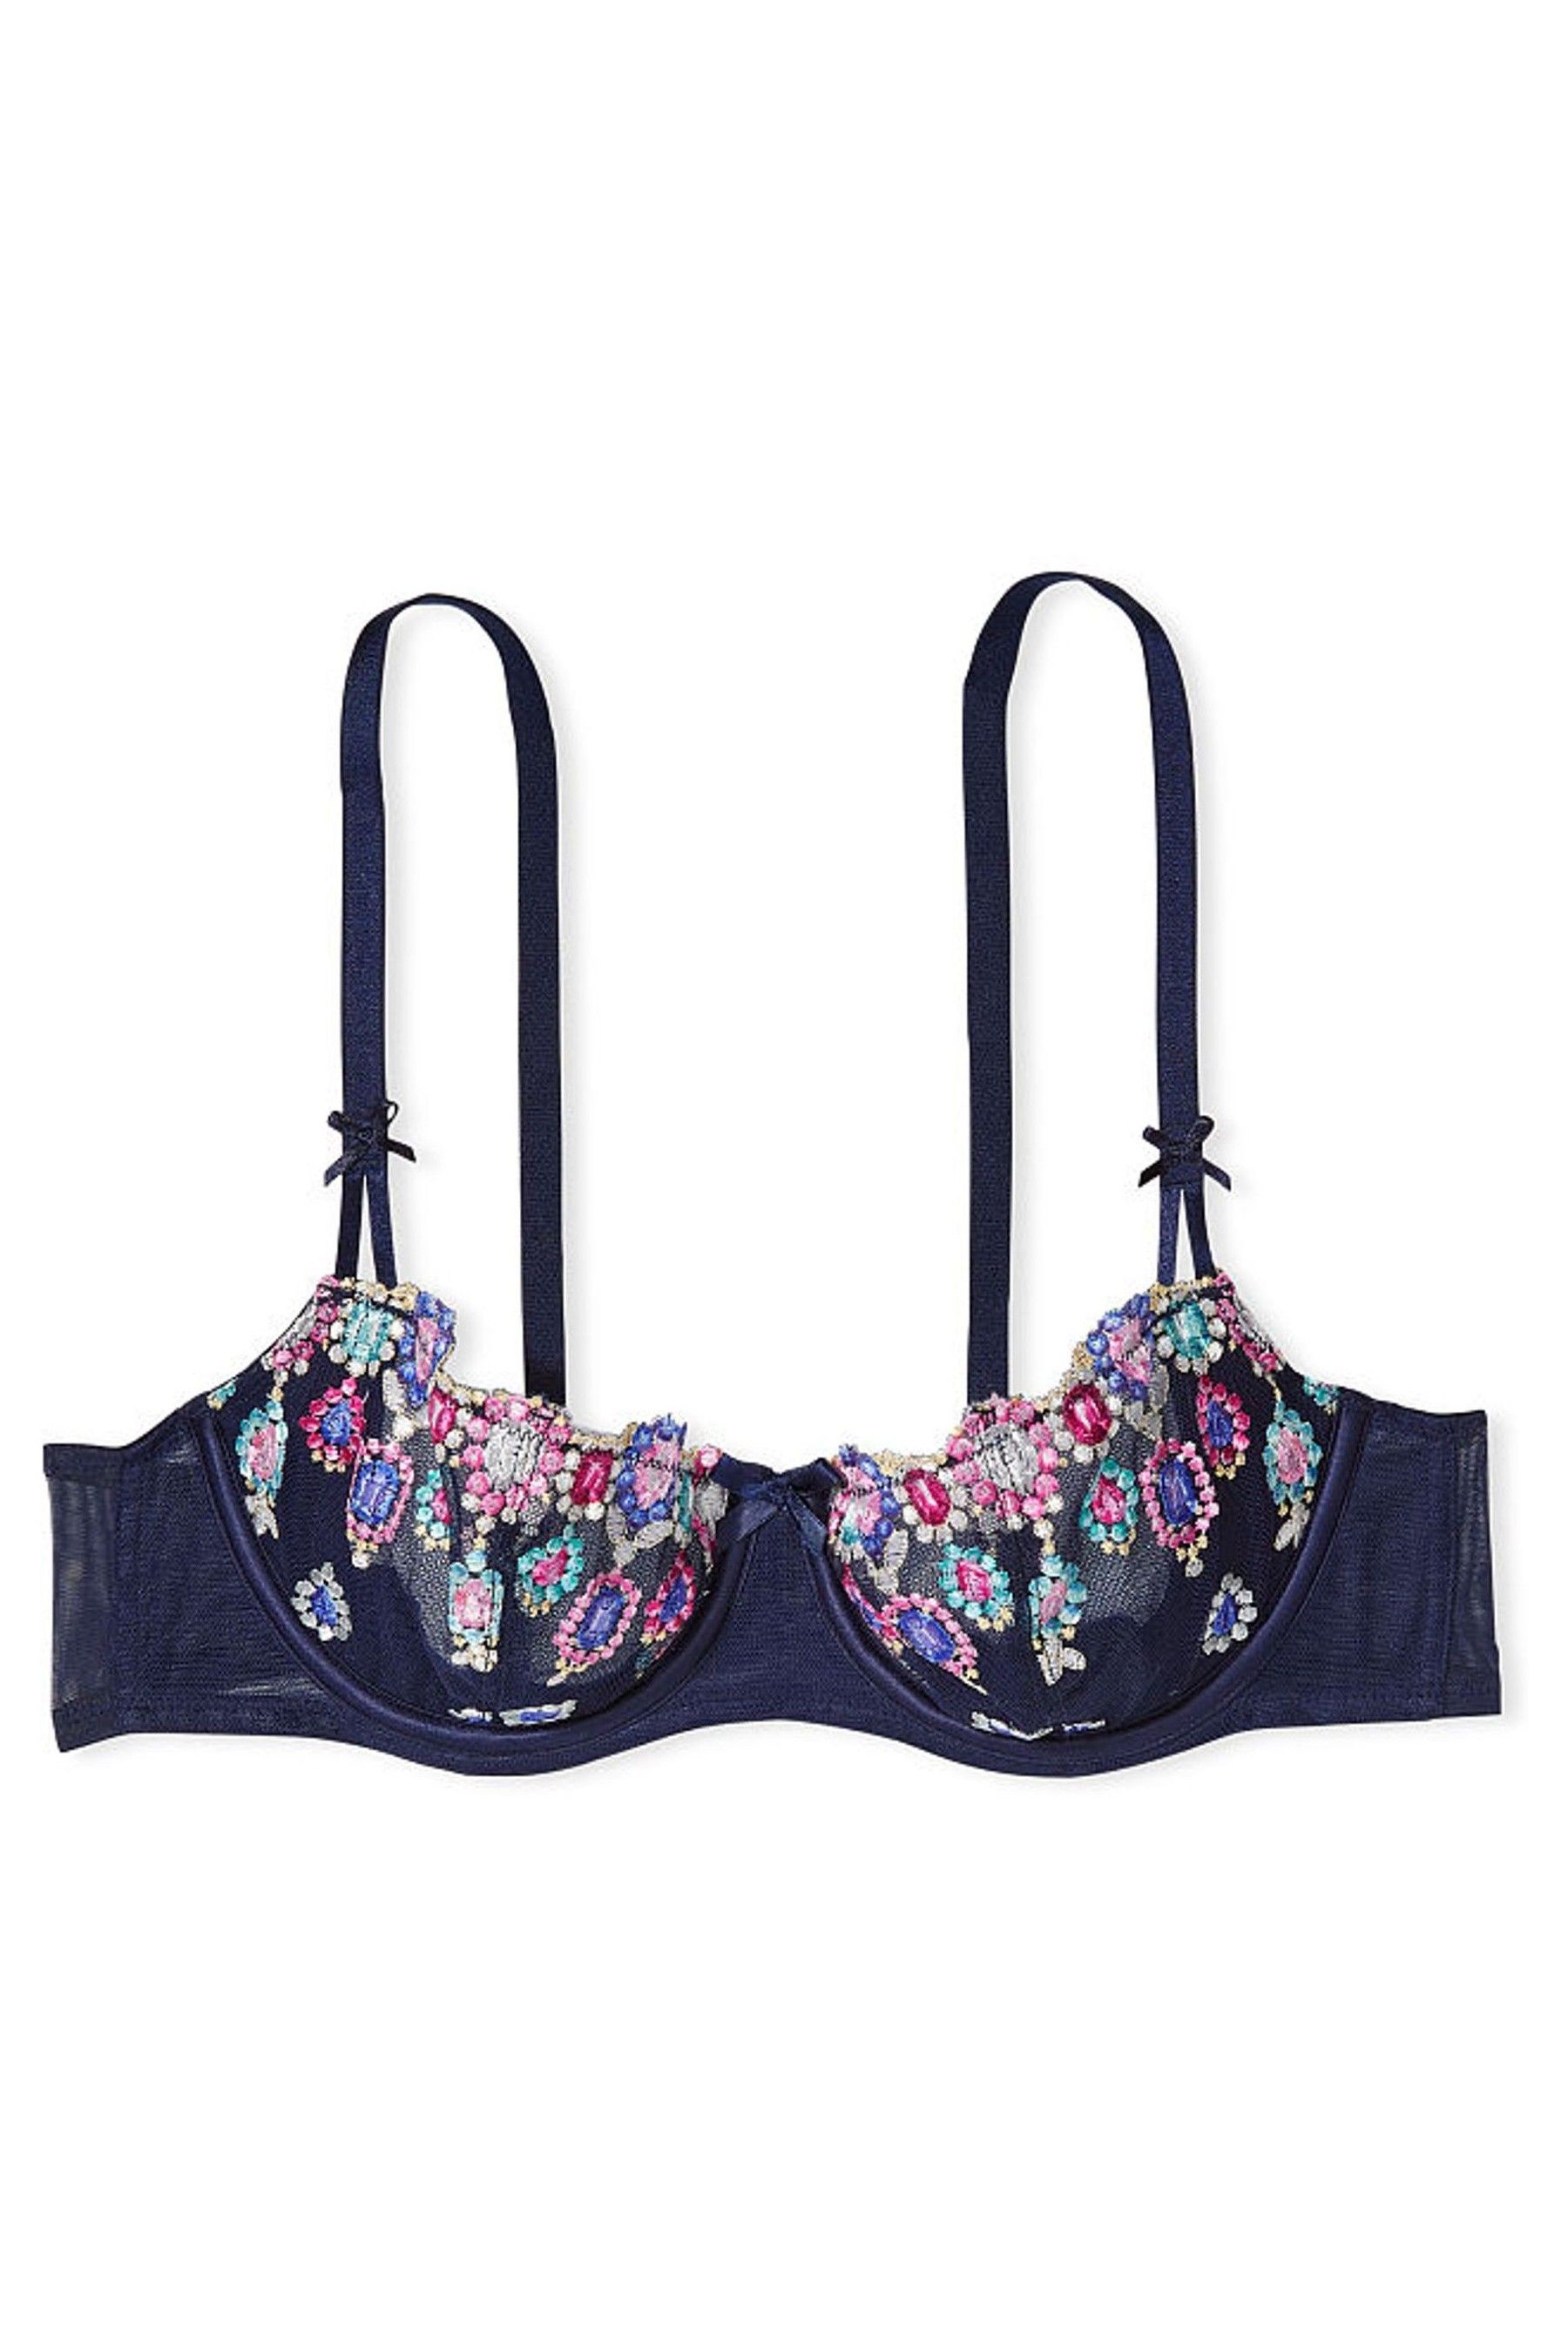 Buy Victoria's Secret Embroidered Unlined Balcony Bra from the Victoria ...